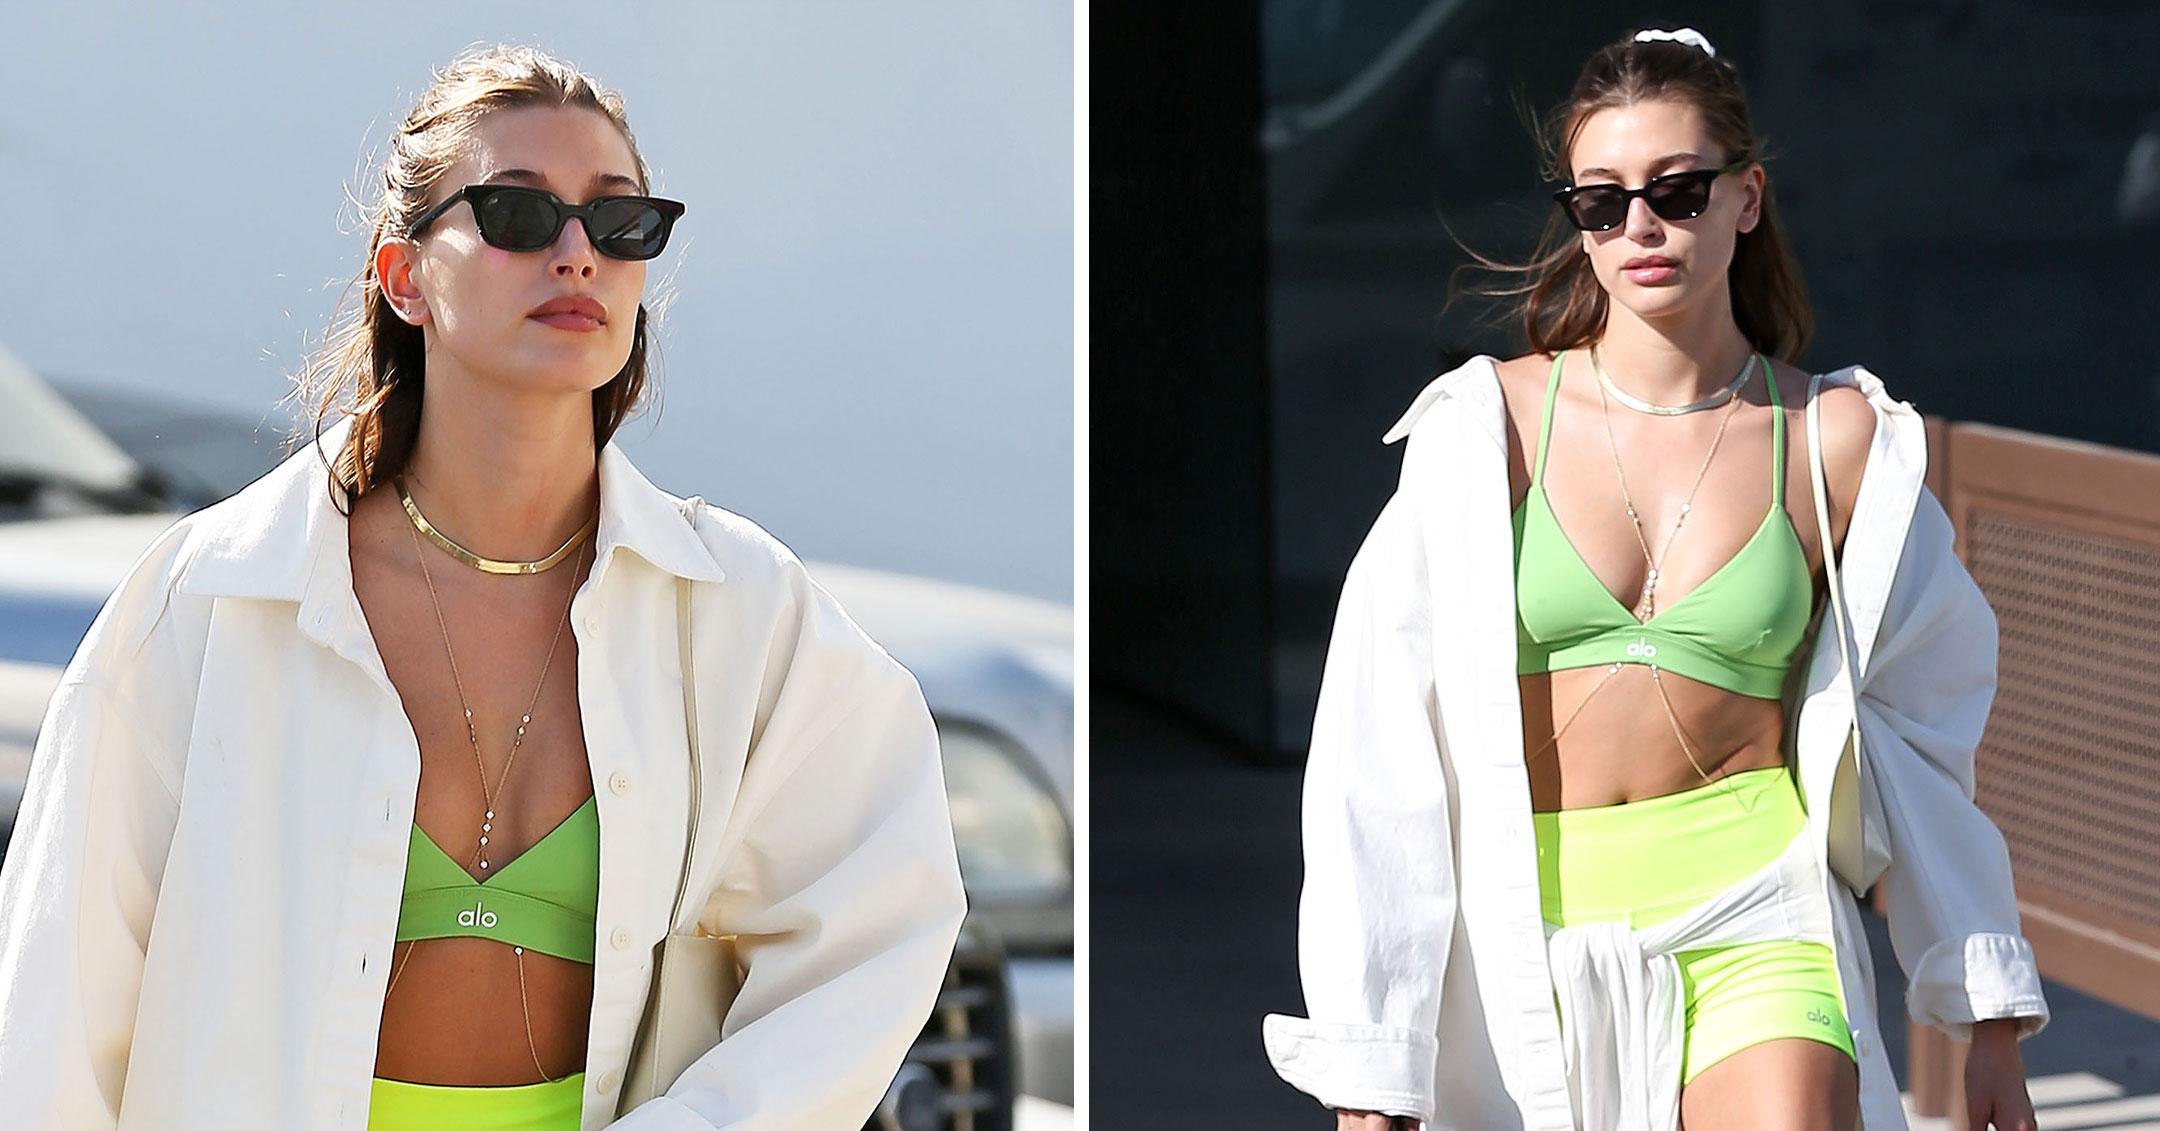 Hailey Bieber Went to Pilates in the Tiniest Bra and Short Set